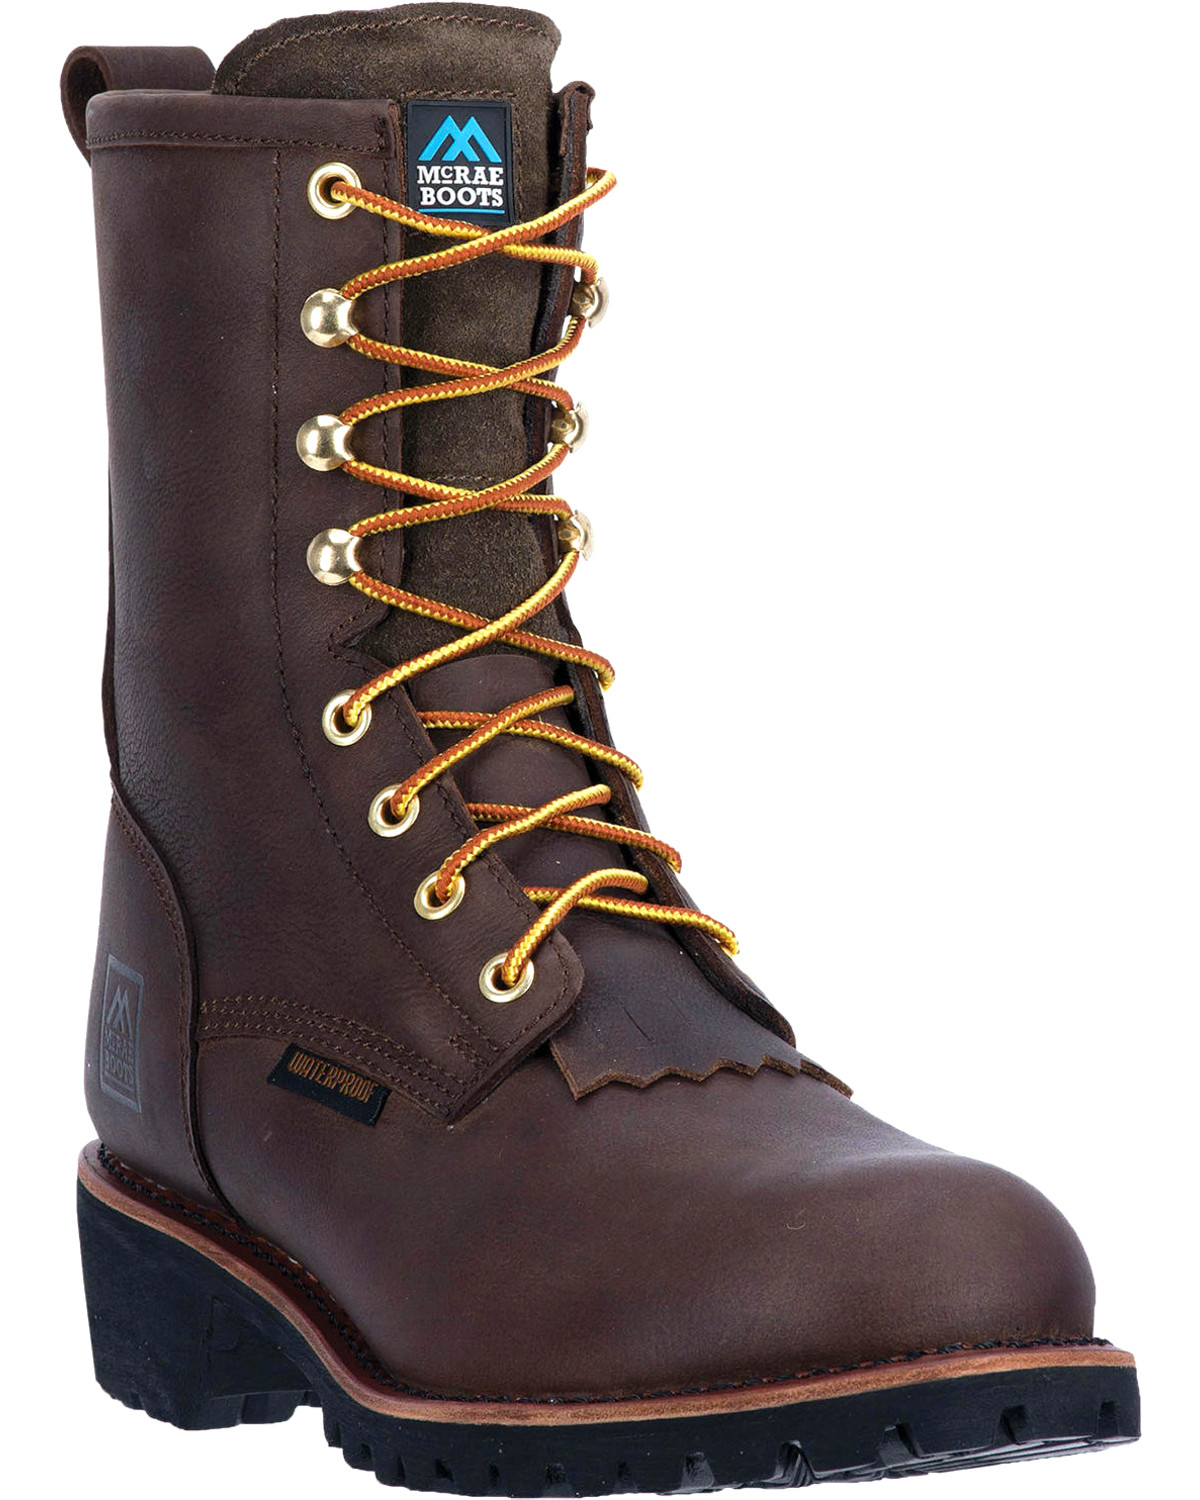 electrical hazard safety boots